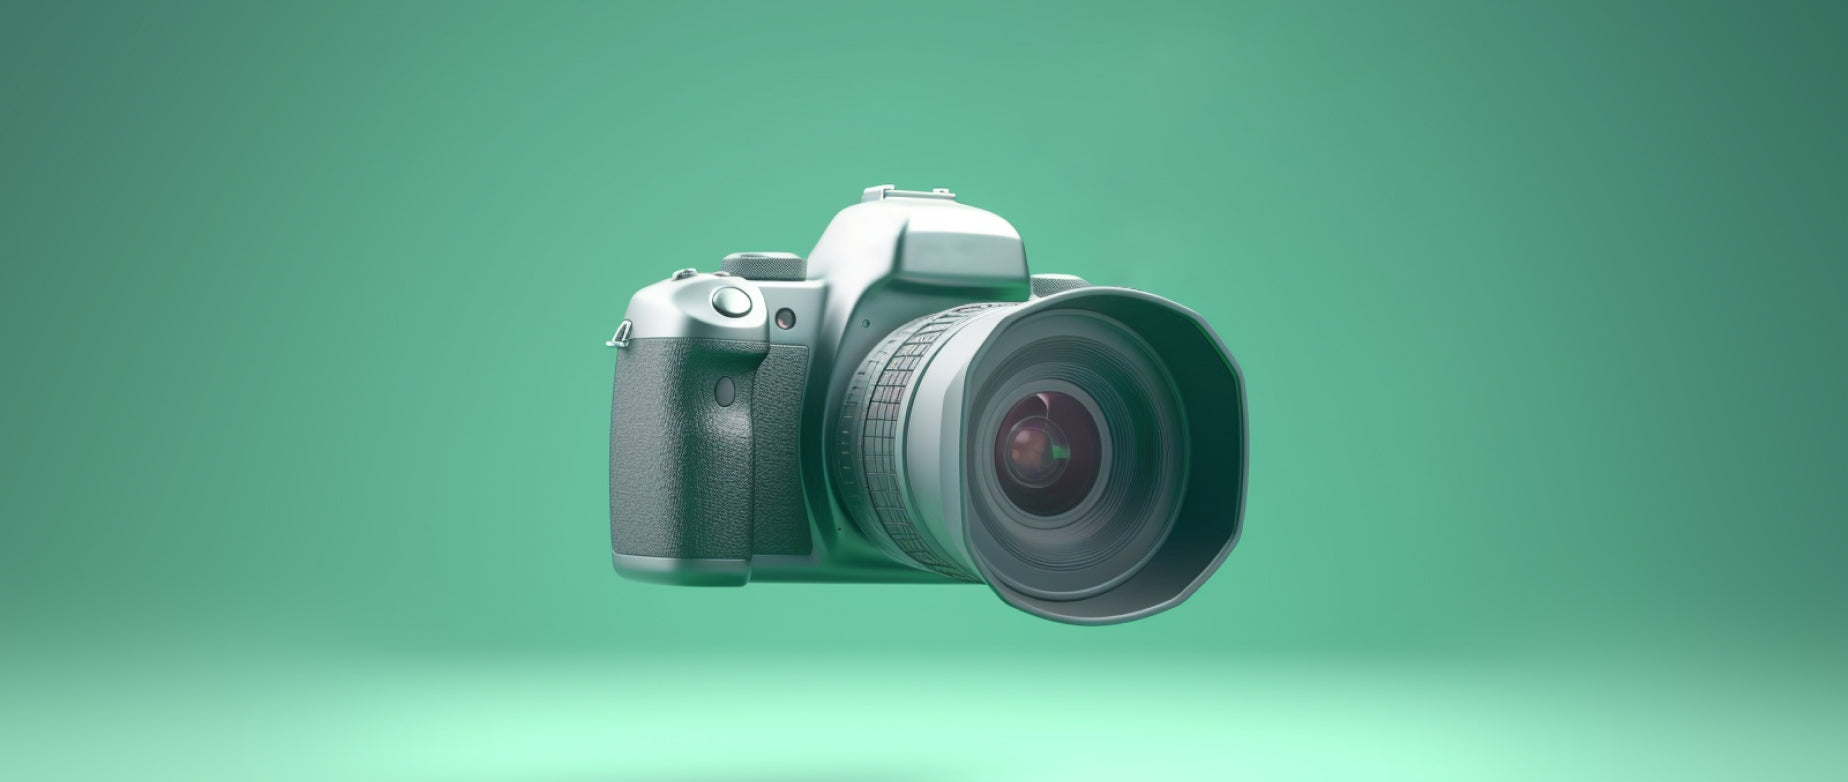 a camera suspended in the air with a green background: how to start a photography business